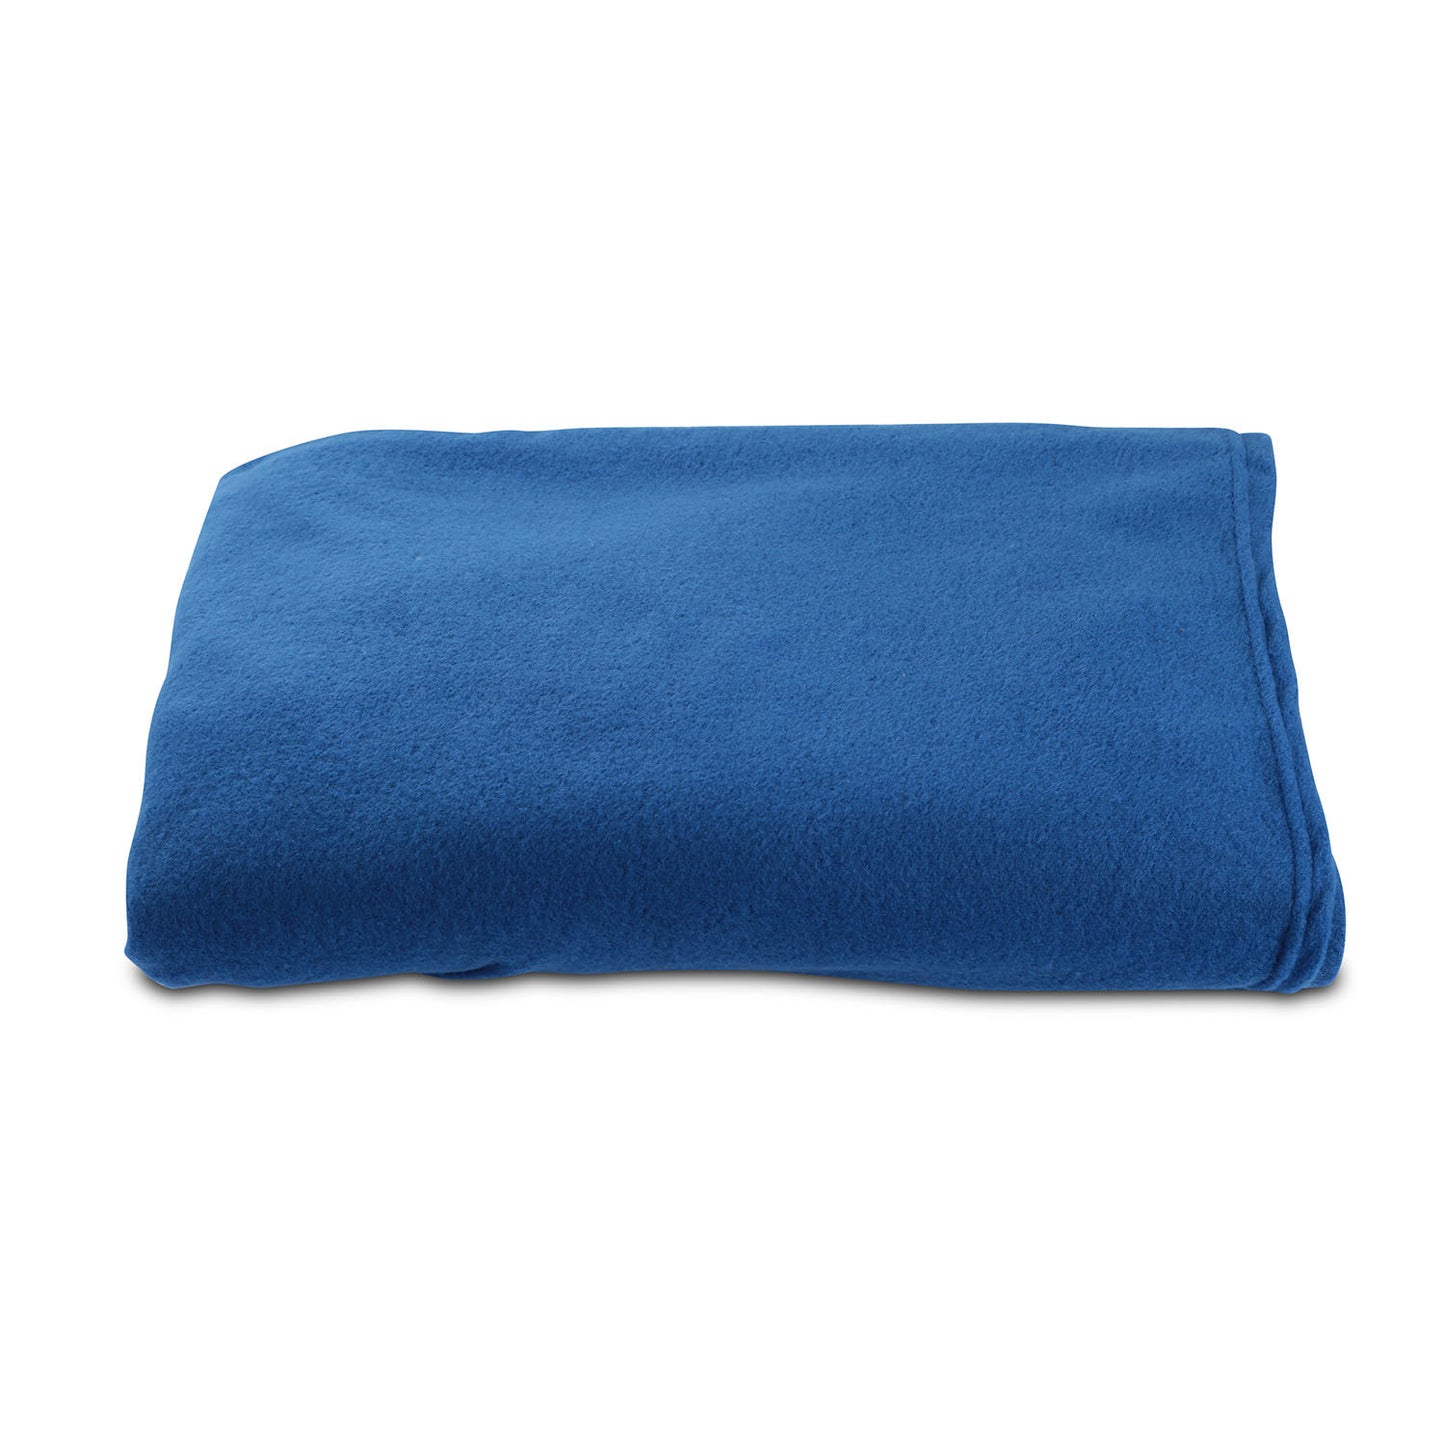 Wearable Fleece Blanket with Sleeves Cozy Warm Microplush Sofa Blanket Extra Soft Lightweight for Adult Women Men 3 Colors